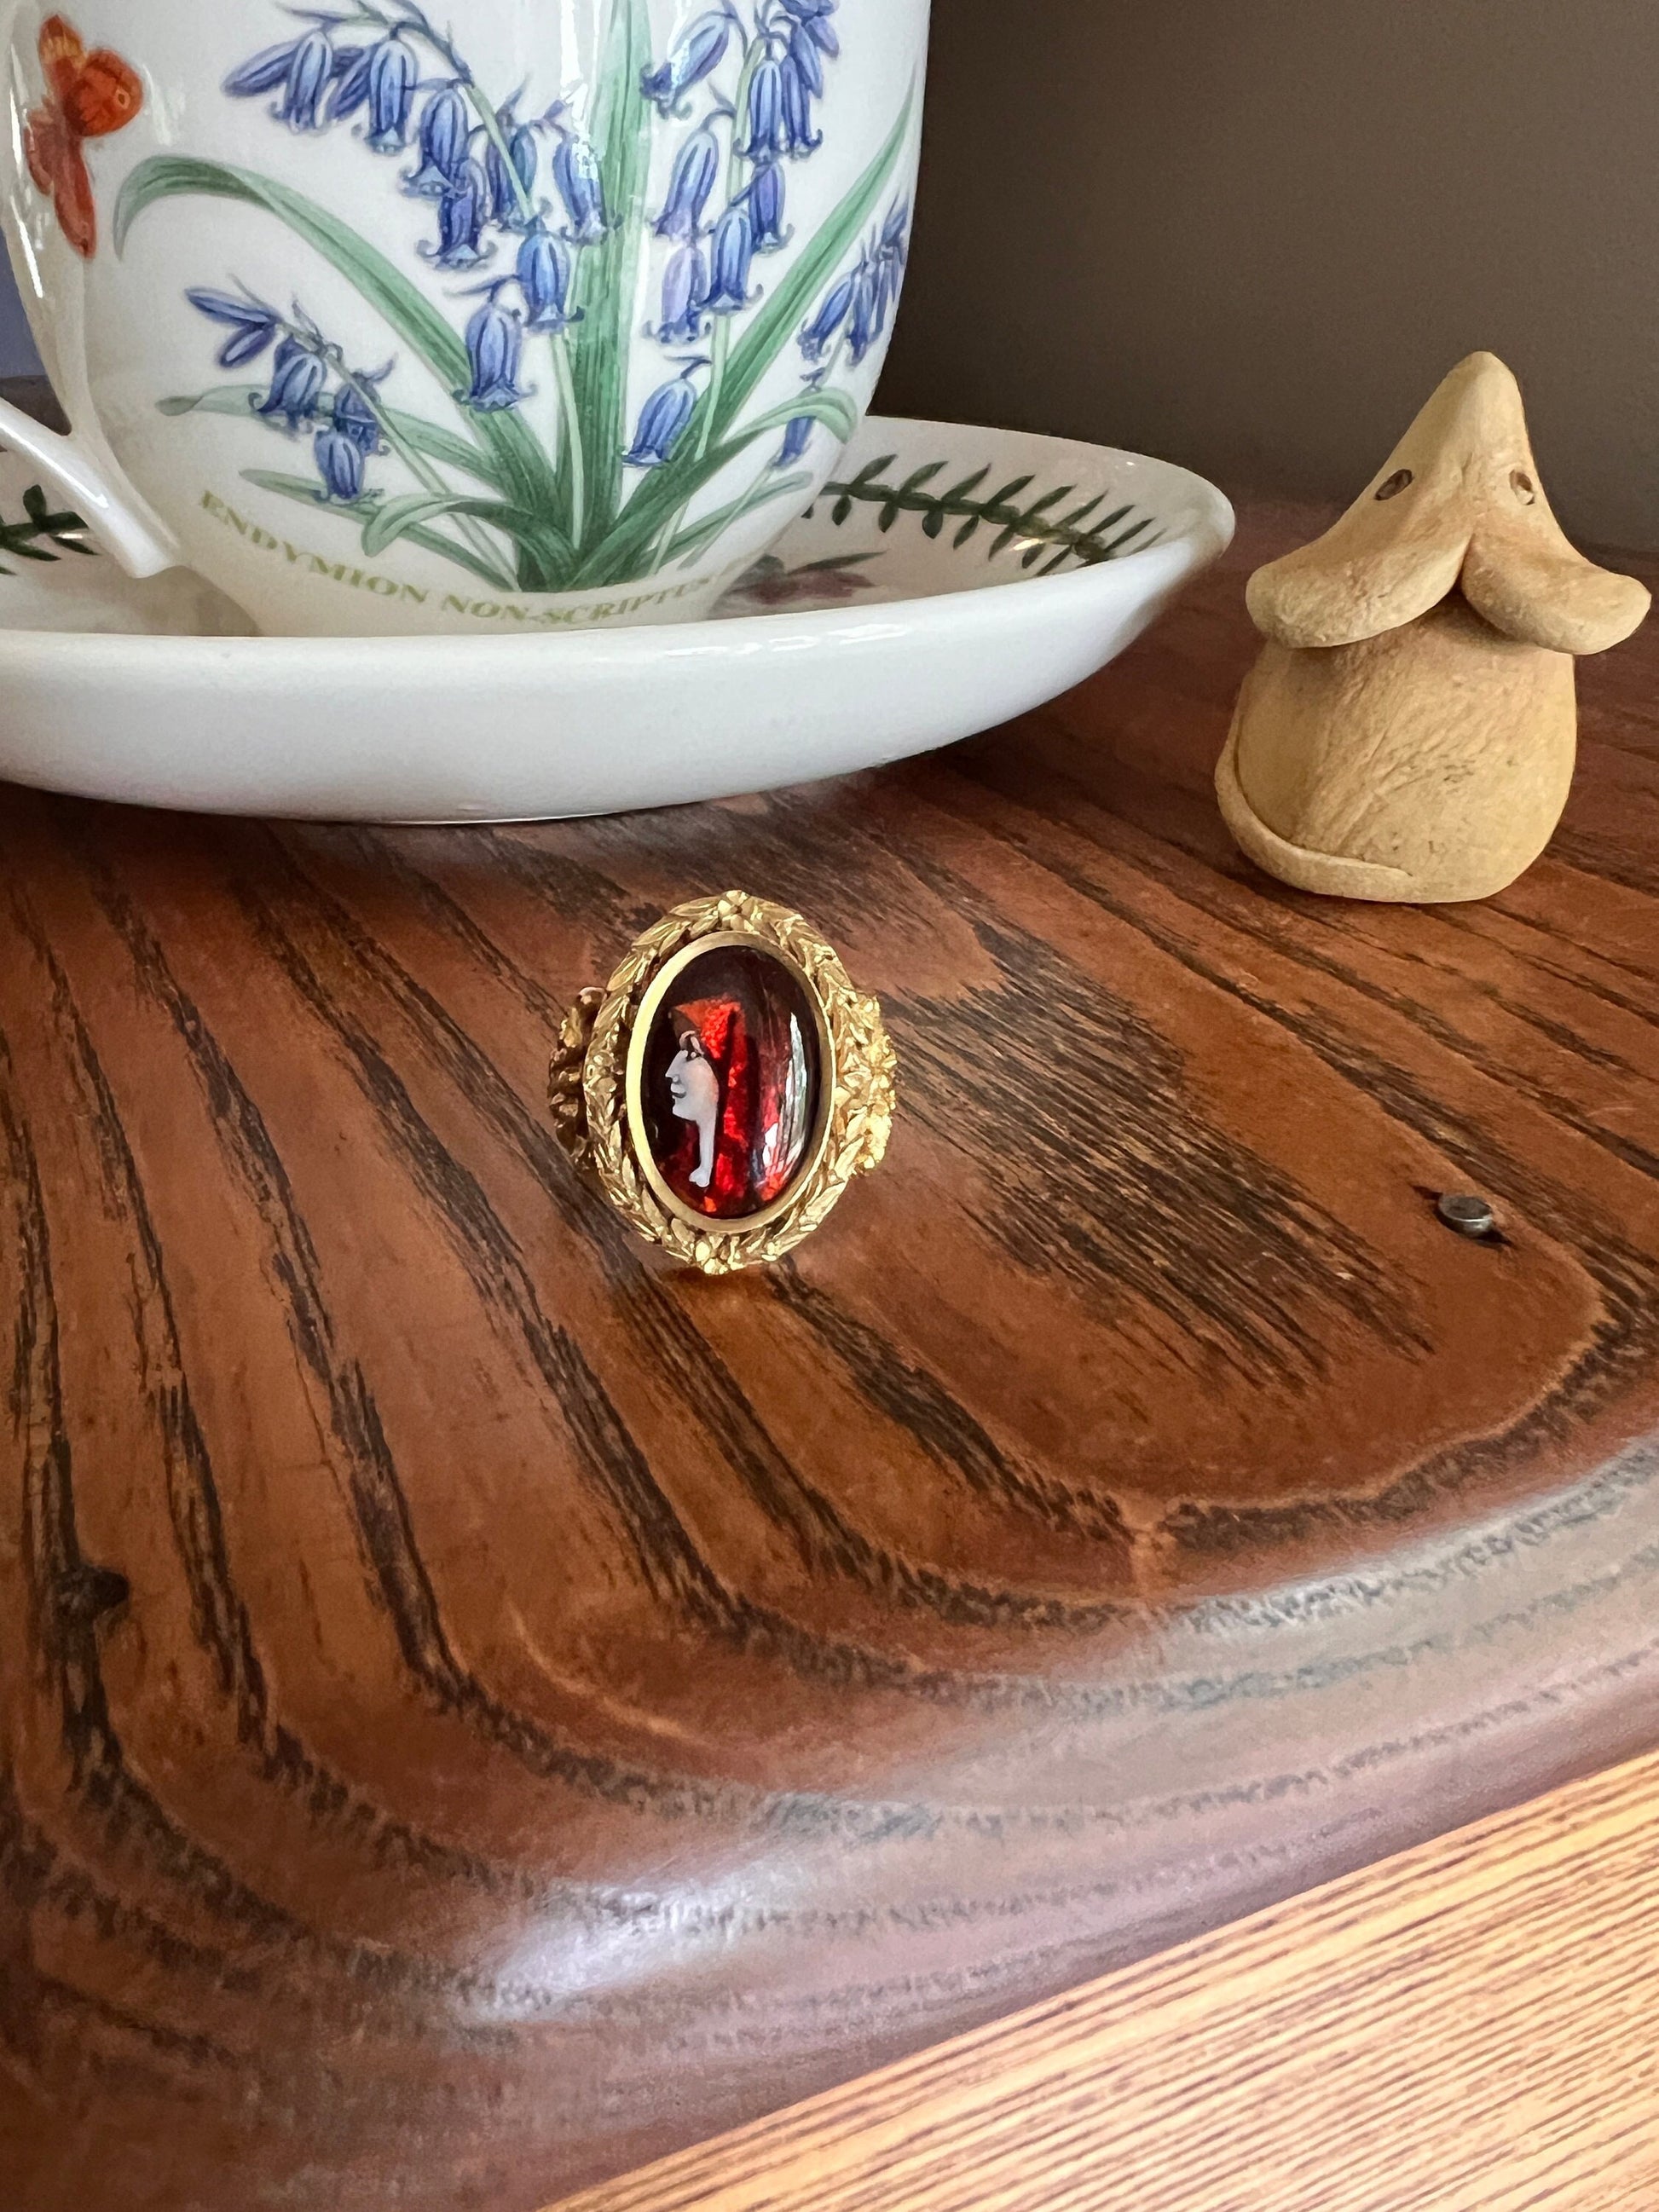 Floral GARLAND Antique FRENCH Enamel LIMOGES Portrait Ring 18k Gold Hand Painted Woman Portrait Metallic Red Signed Bonnadier Forget Me Not